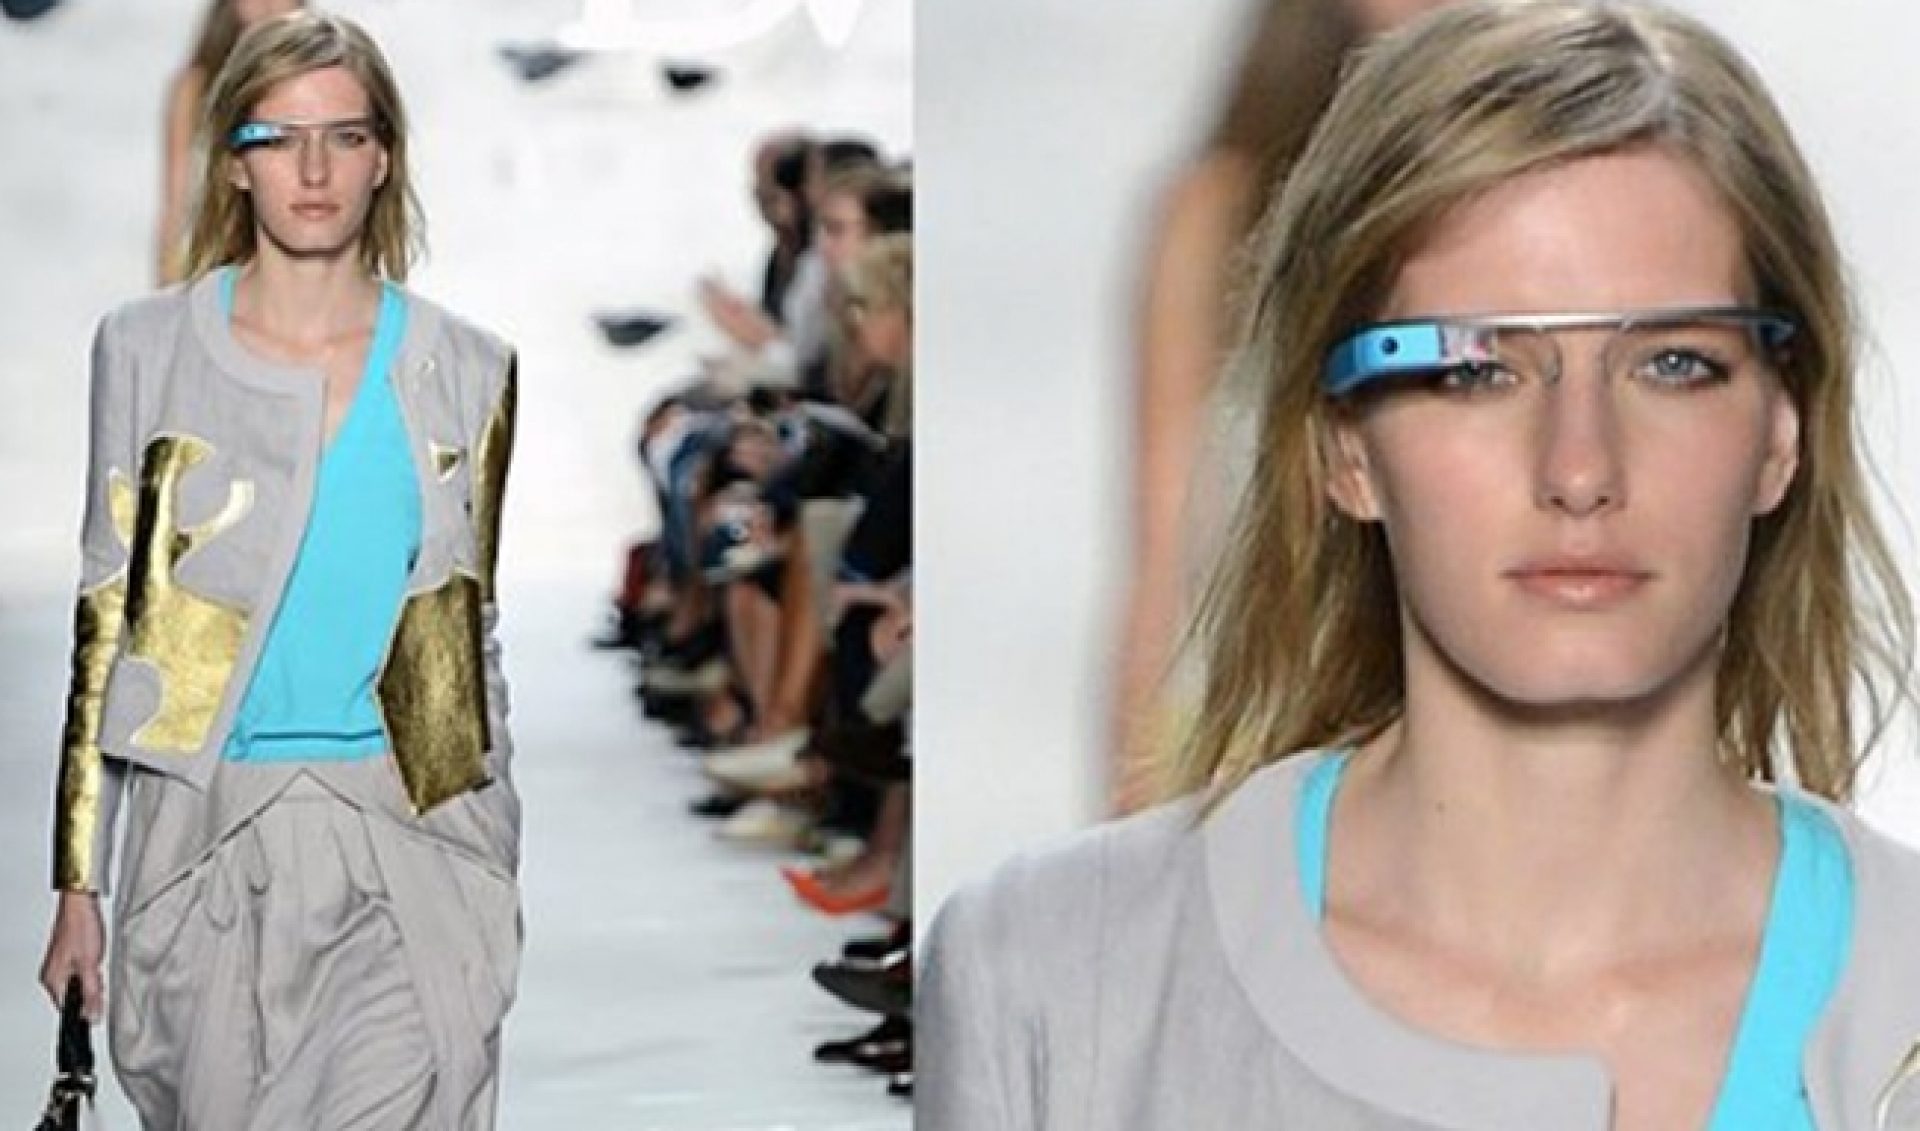 Google Glasses Meet New York Fashion Week, Not Much Changes (Yet)